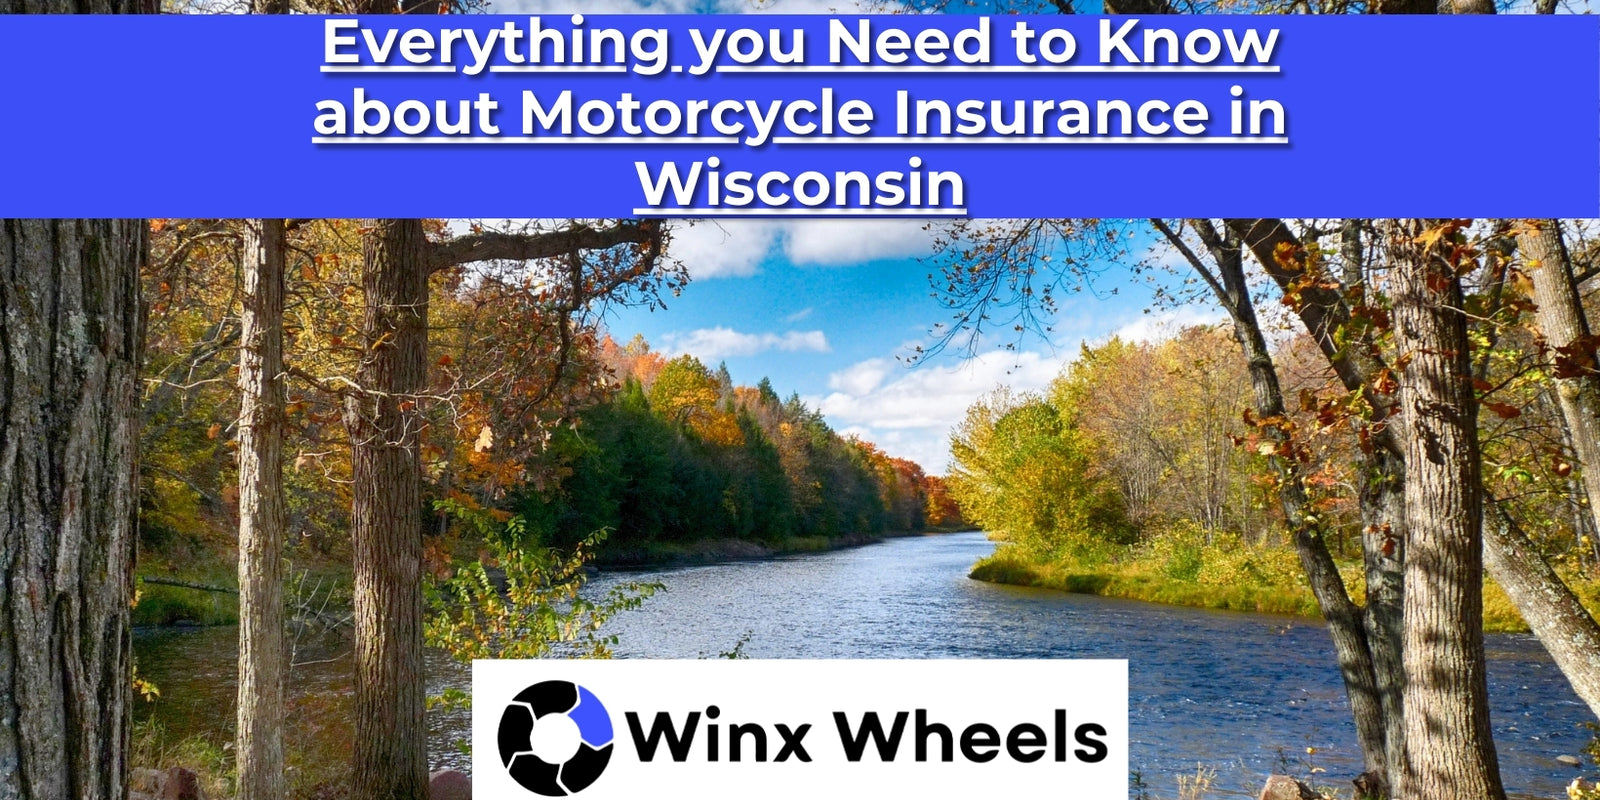 Everything you Need to Know about Motorcycle Insurance in Wisconsin